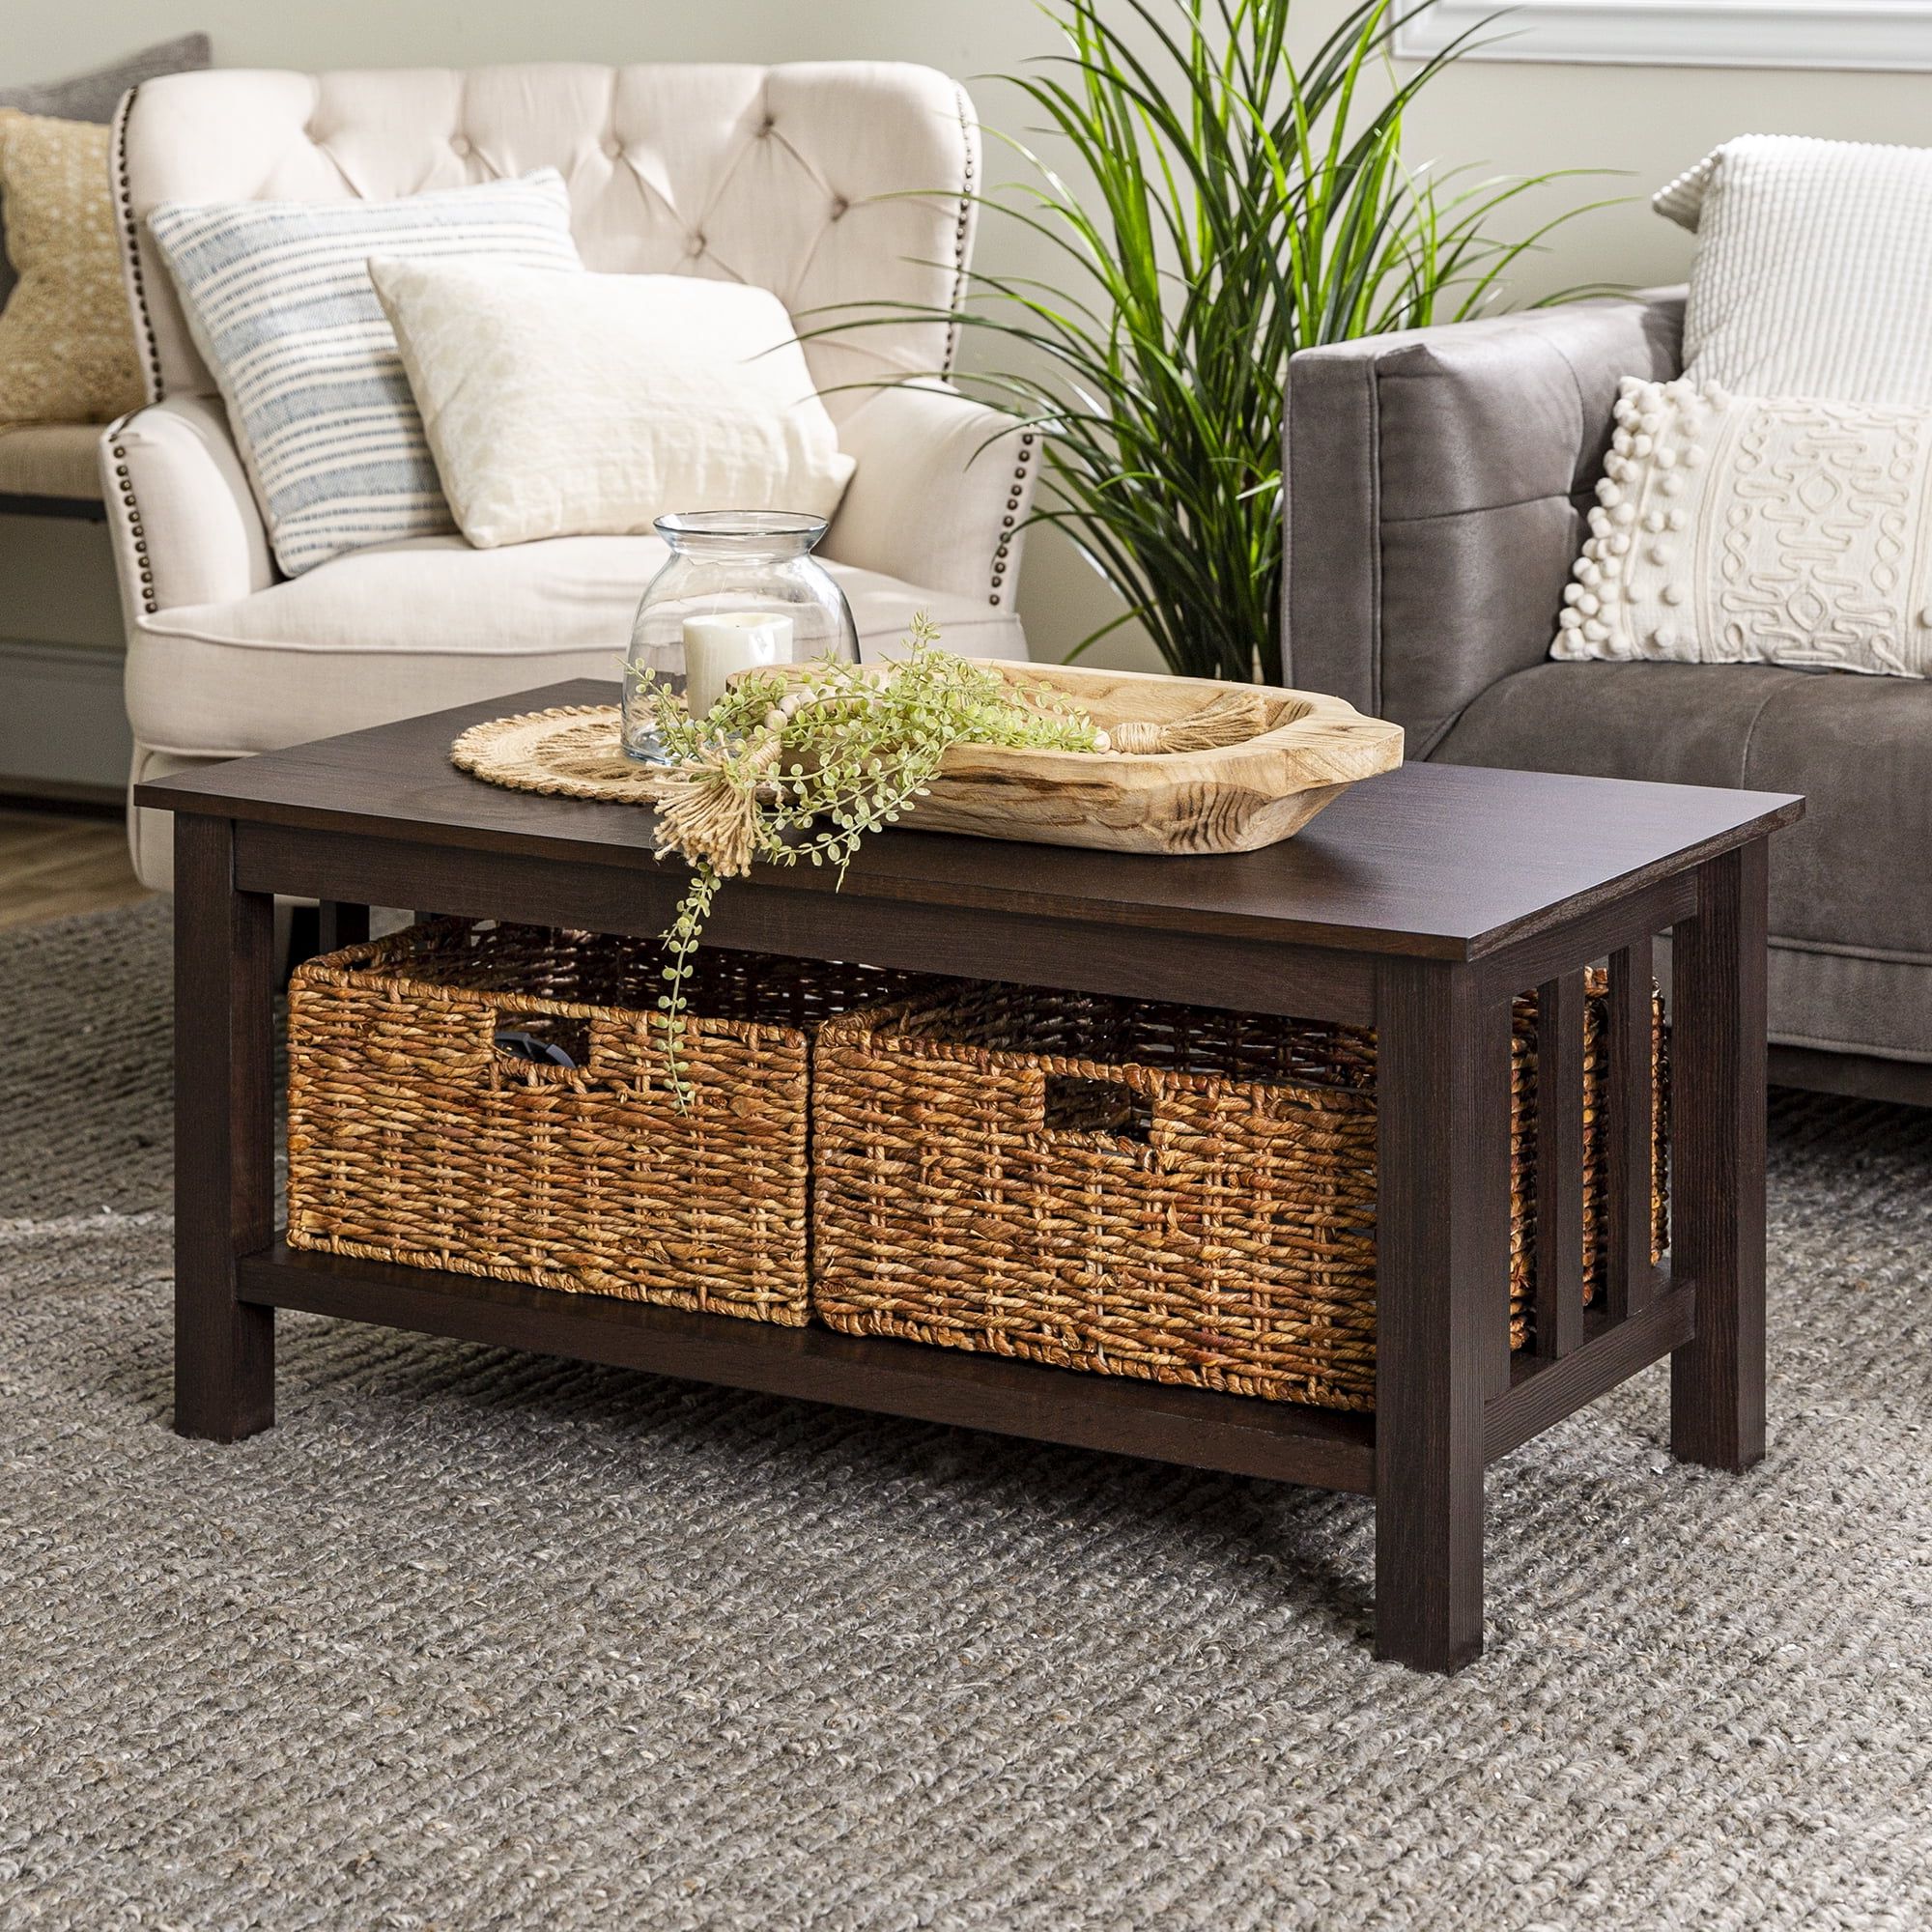 Woven Paths Traditional Storage Coffee Table With Bins, Espresso With Regard To Woven Paths Coffee Tables (Gallery 8 of 20)